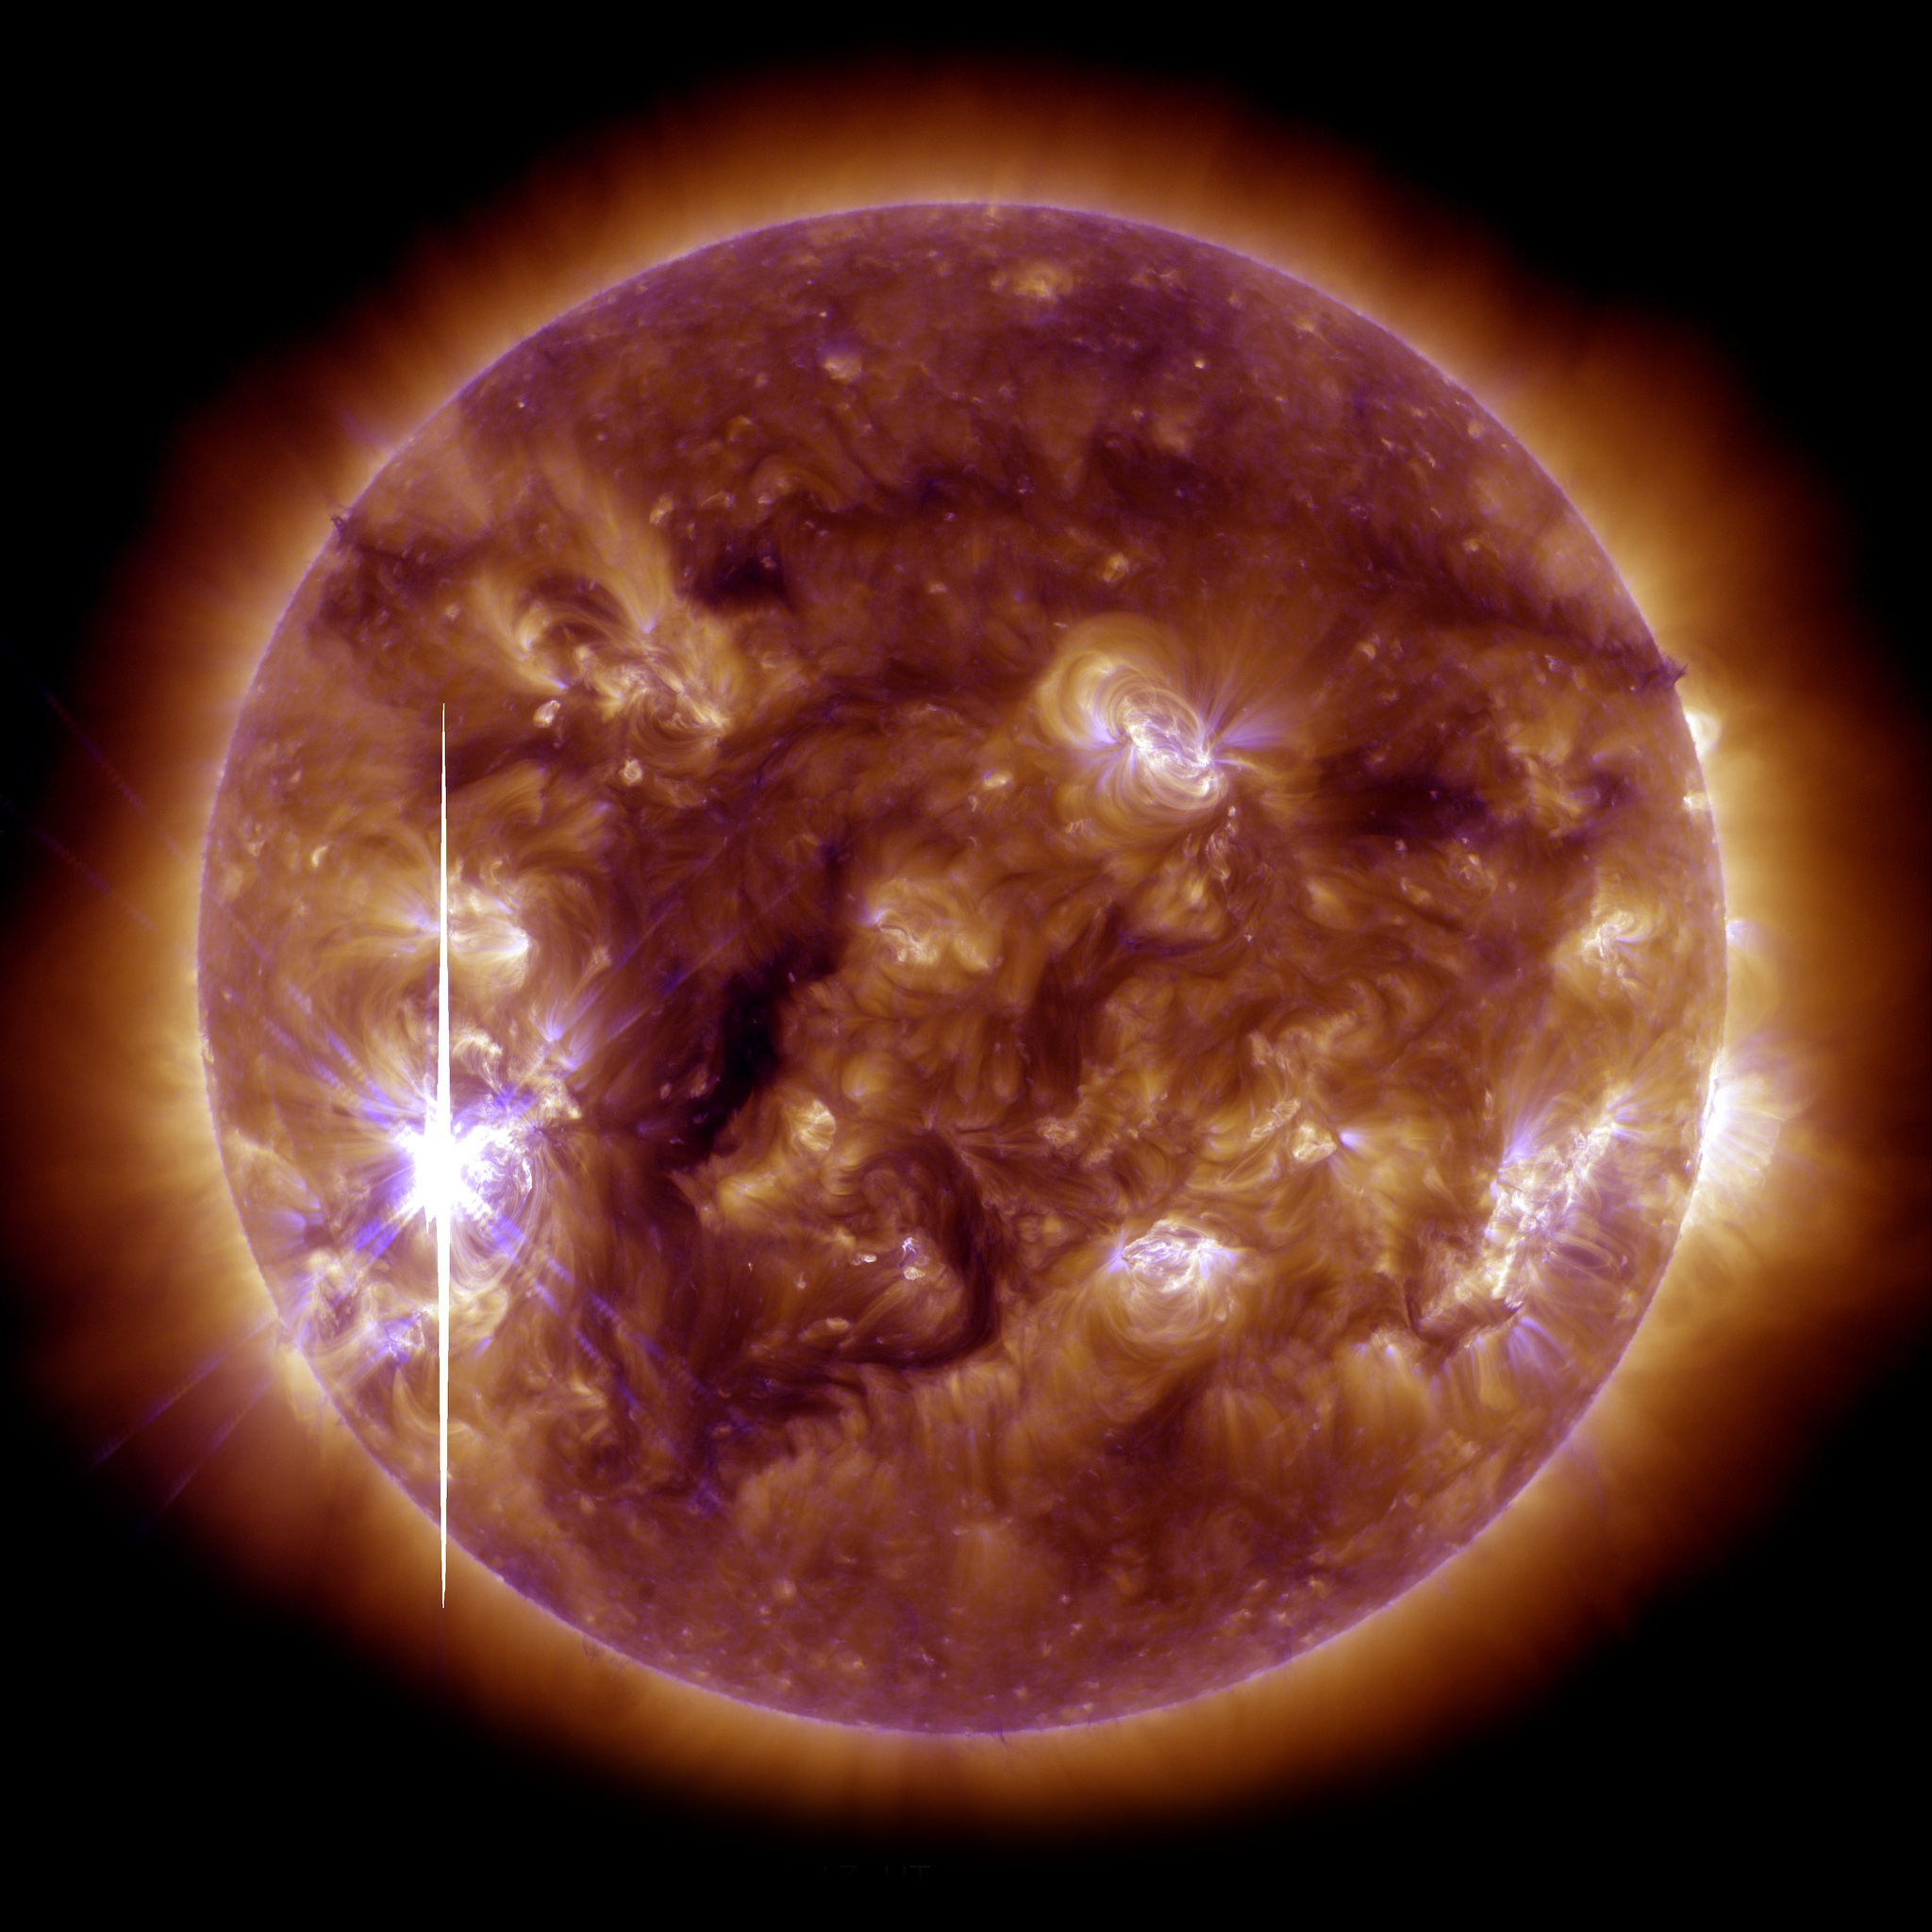 X3.3 flare from 22:15 UT on Nov 5, 2013.  This image is a blend of SDO AIA 193 and 131 angstrom wavelengths.